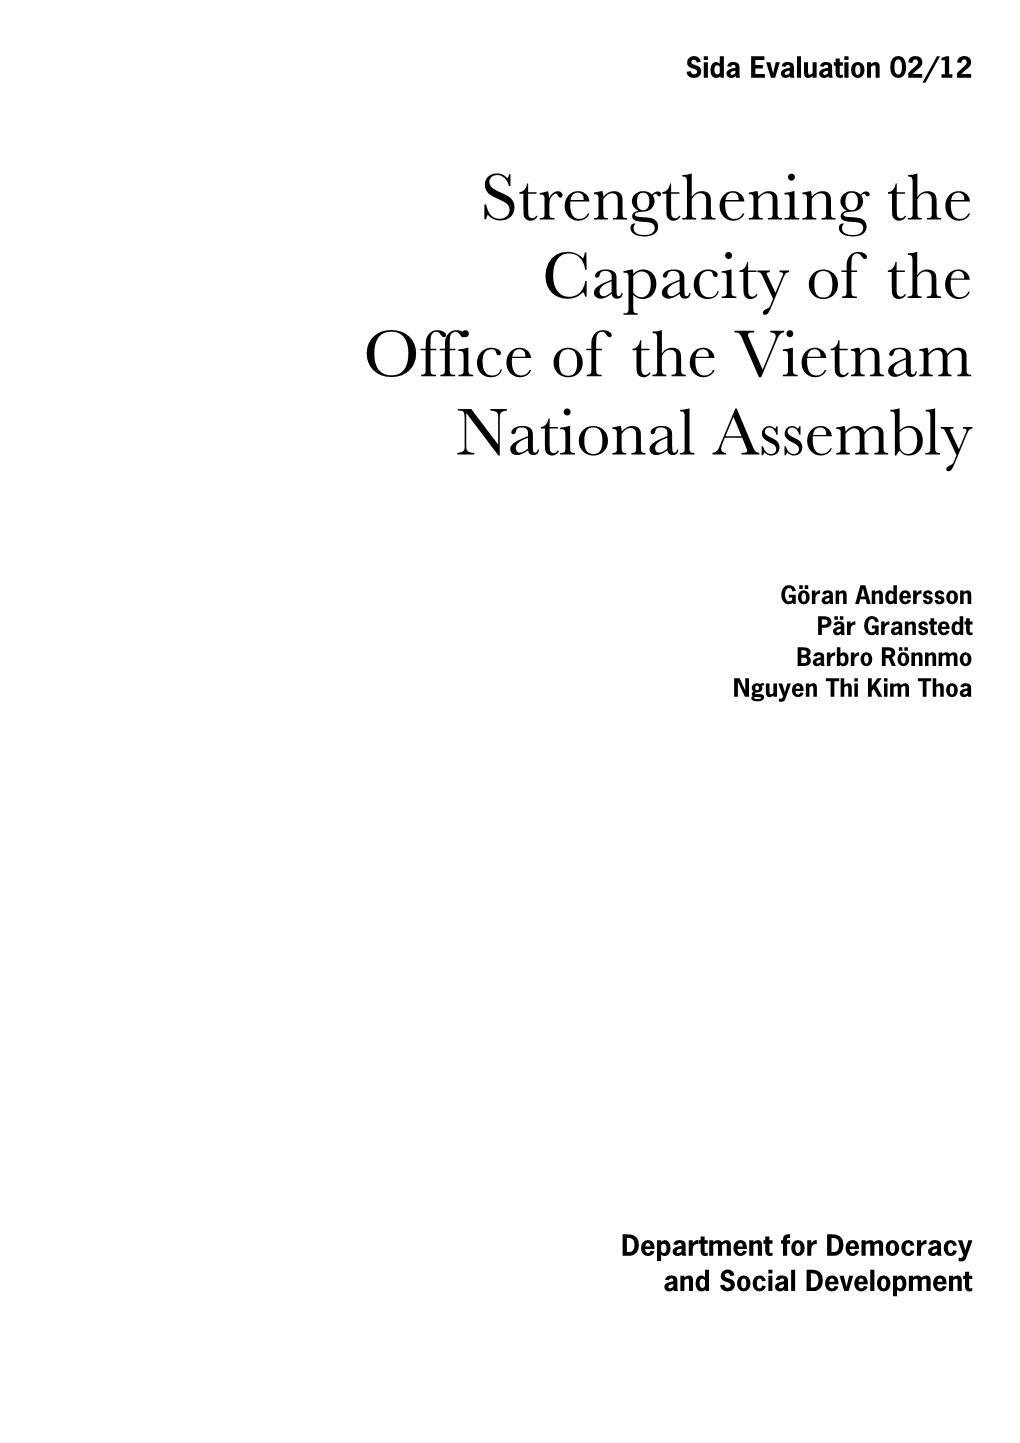 Strengthening the Capacity of the Office of the Vietnam National Assembly